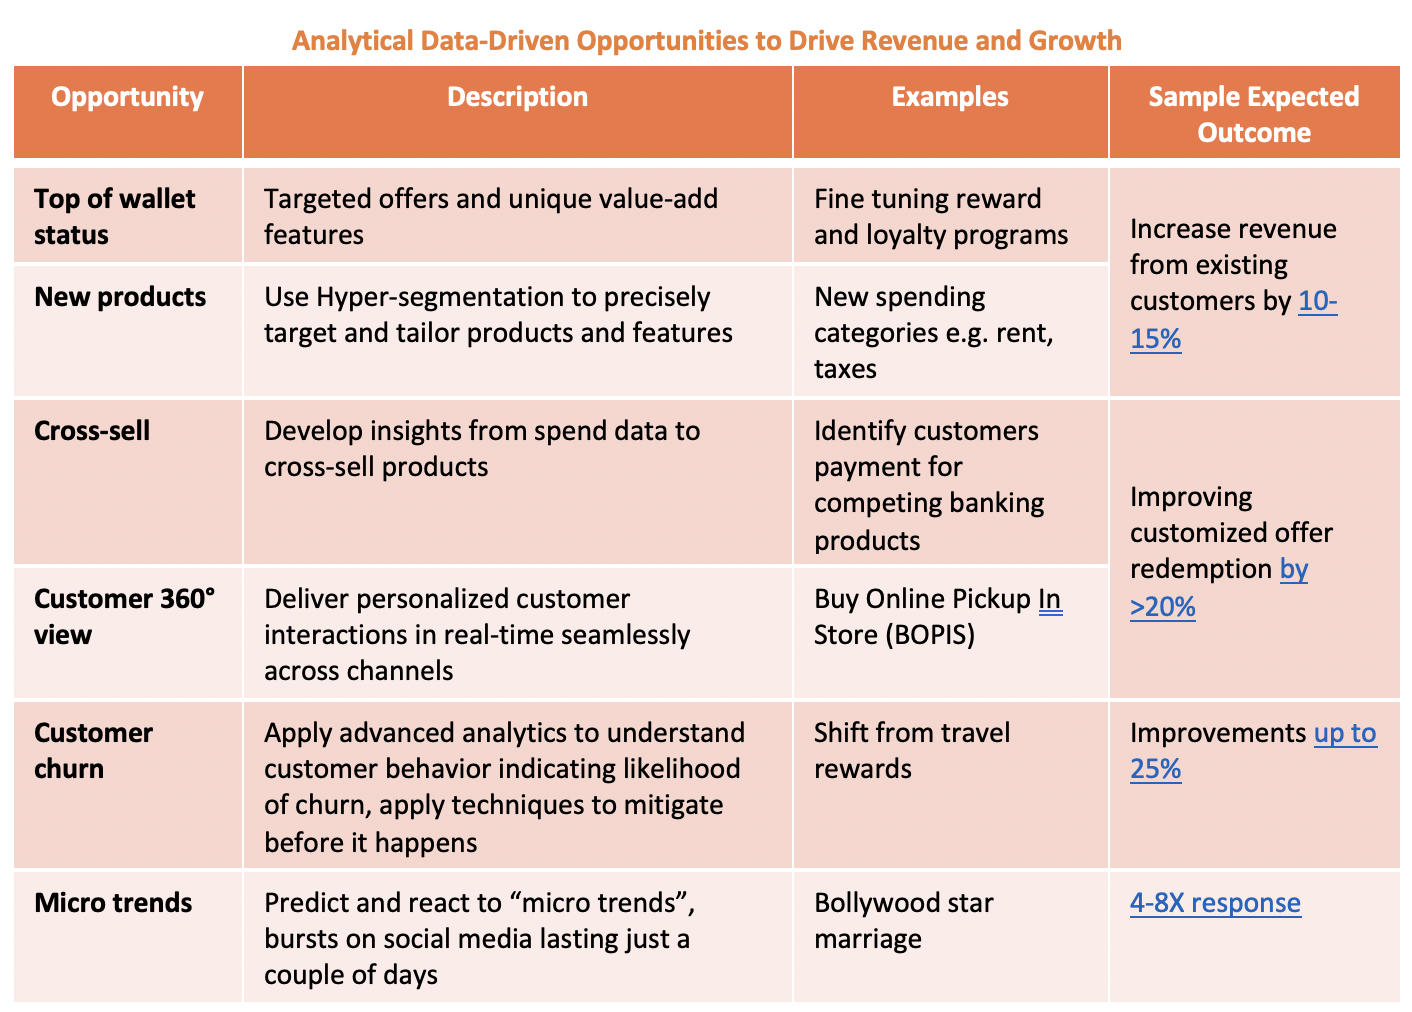 Opportunities to drive revenue and growth via digital payments for credit card companies